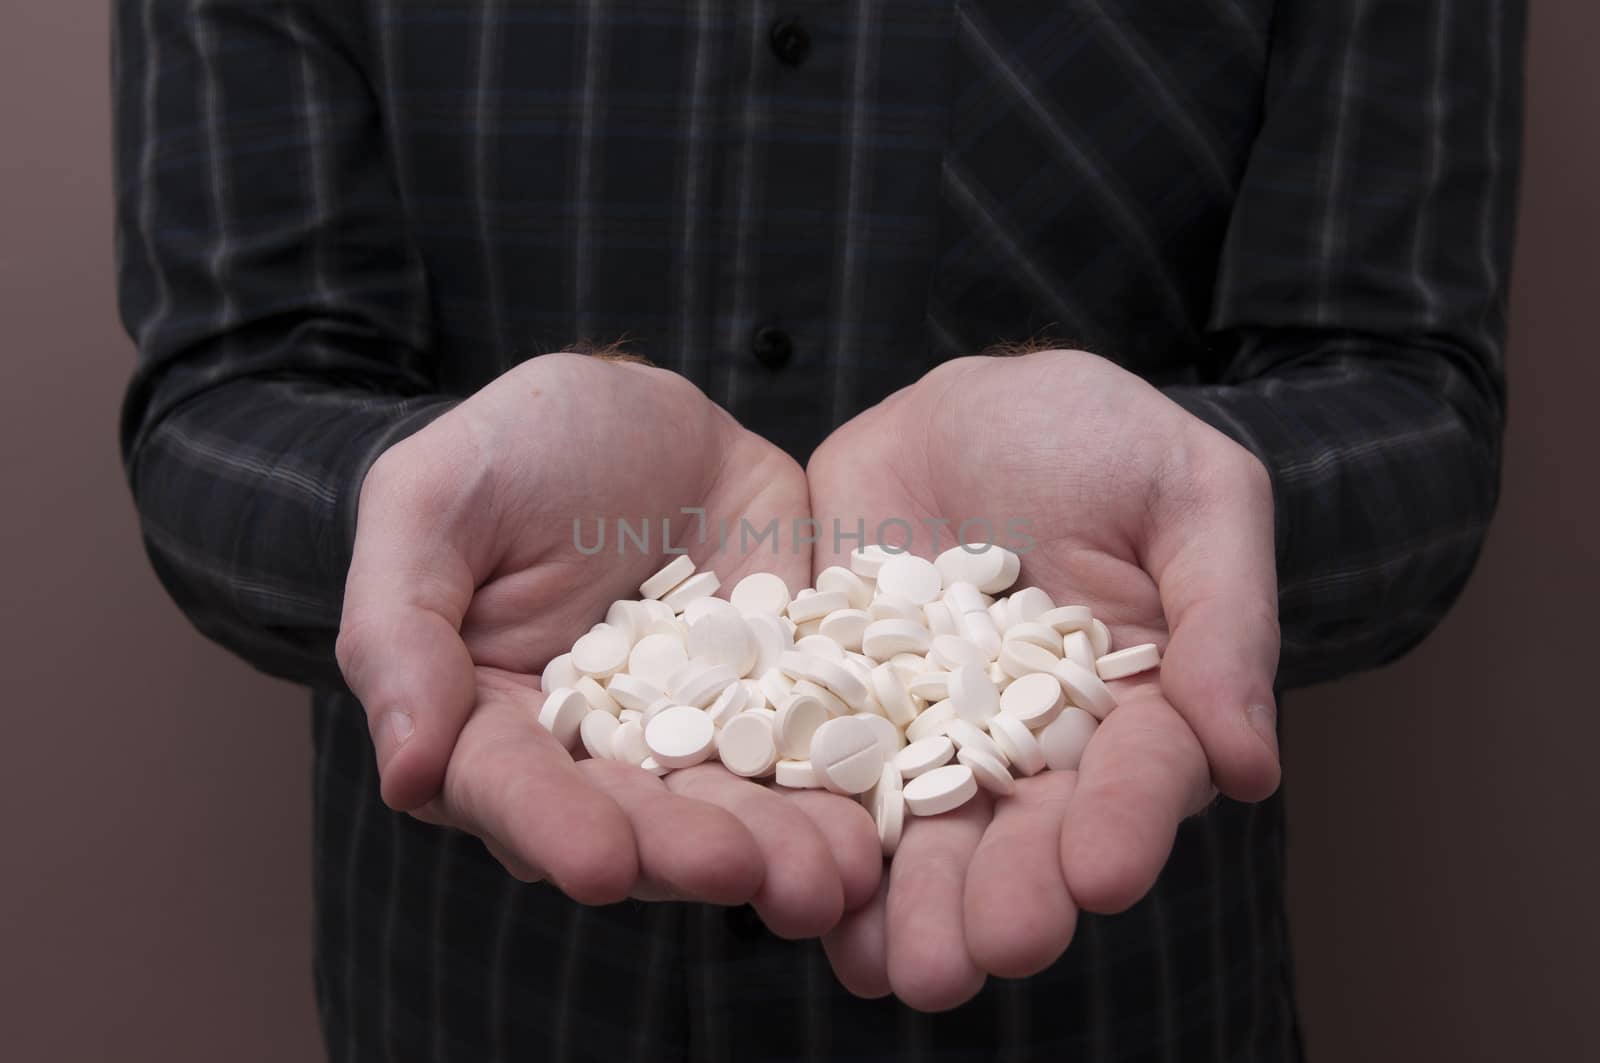 Caucasian Man Holding a Bunch of Pills and Capsules / Capsules and Pills / Medicine